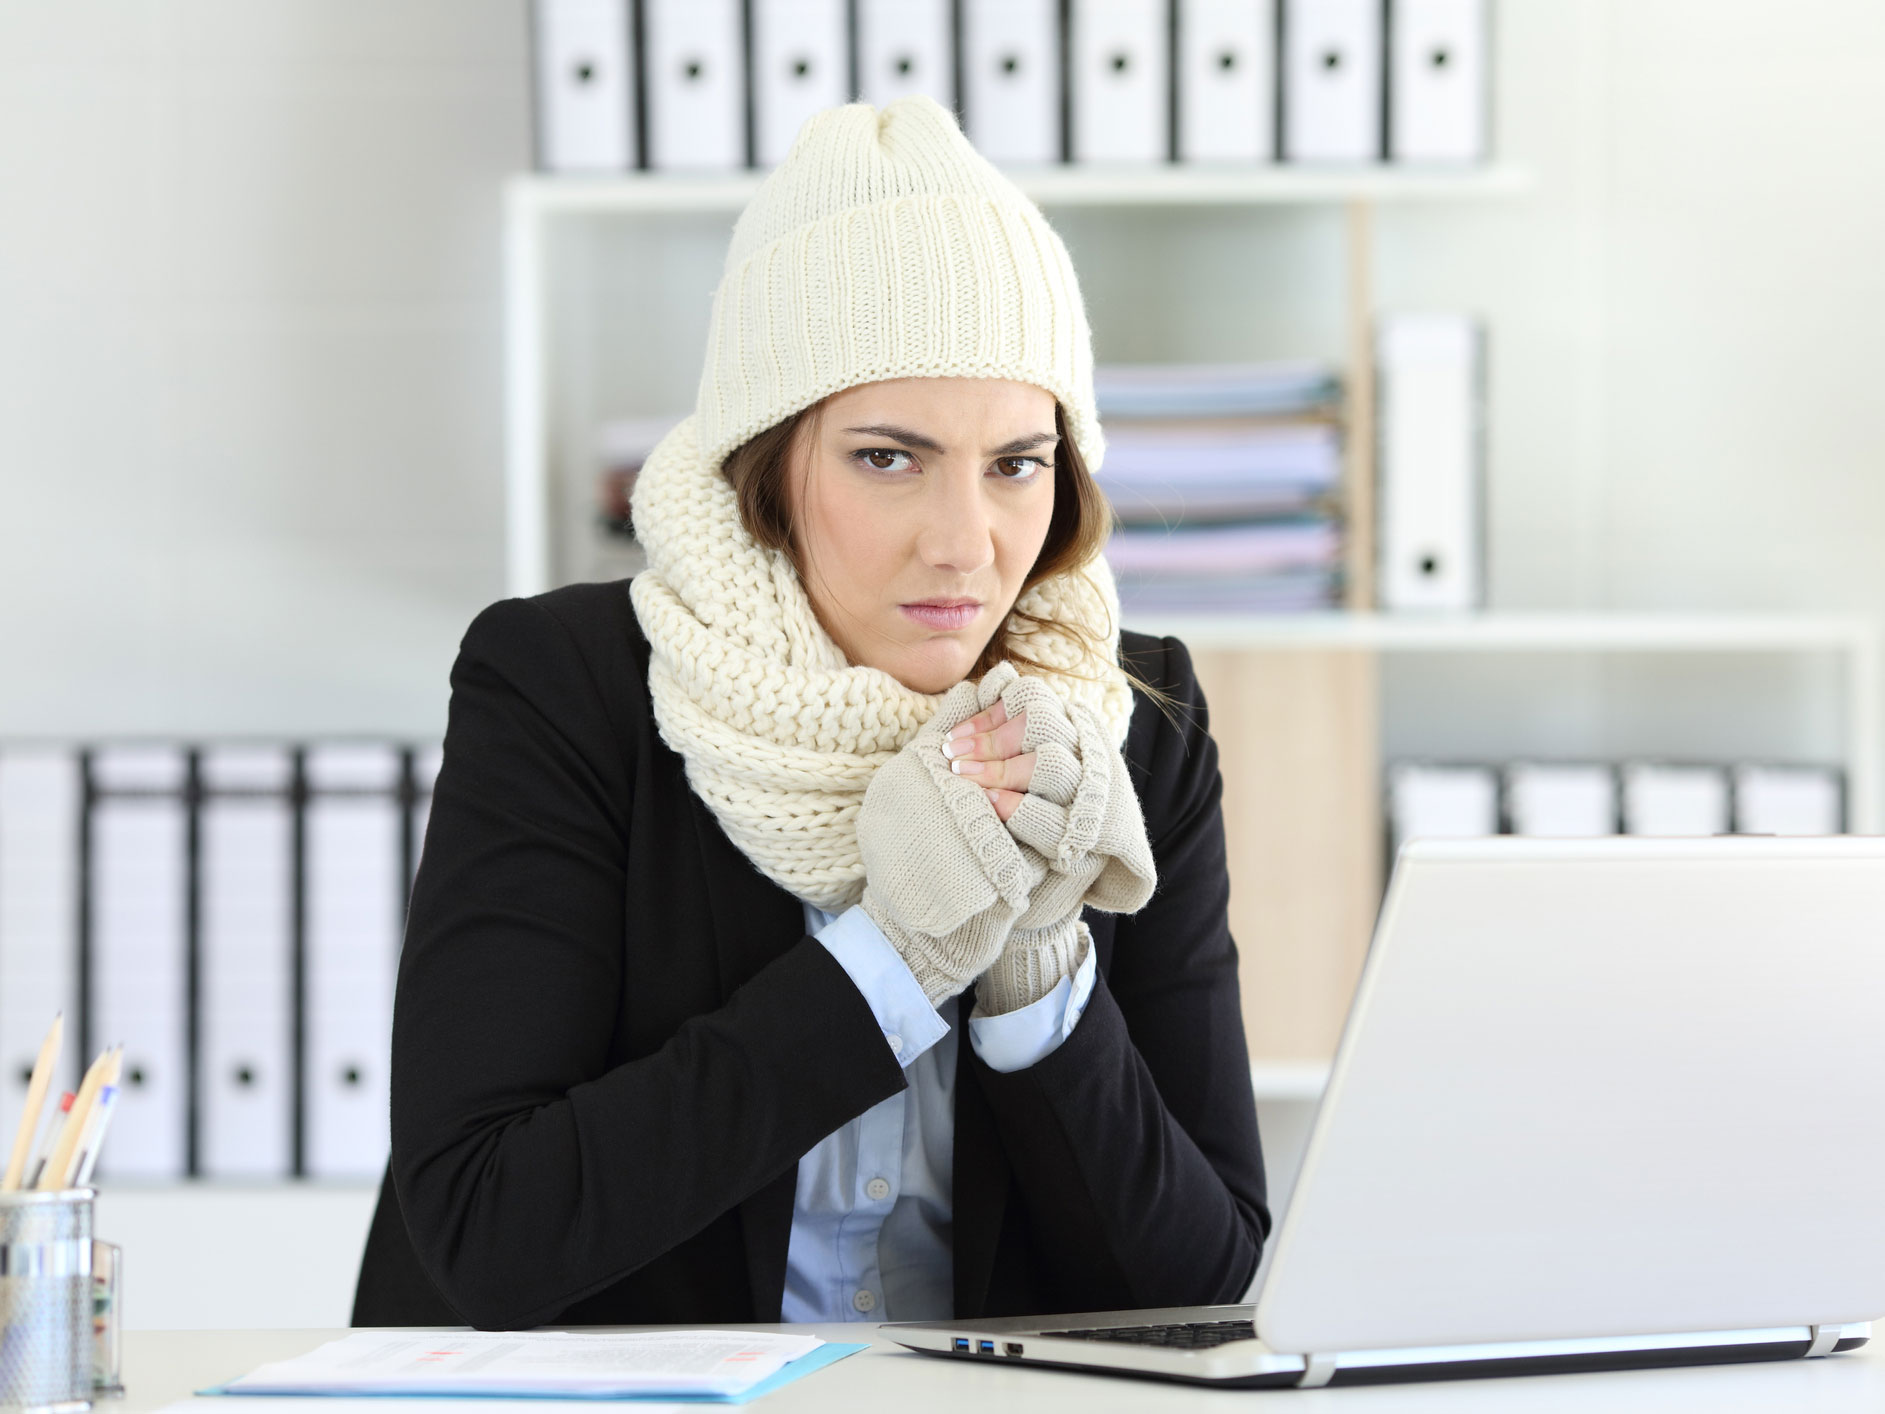 Turning up the office thermostat turns up performance for women